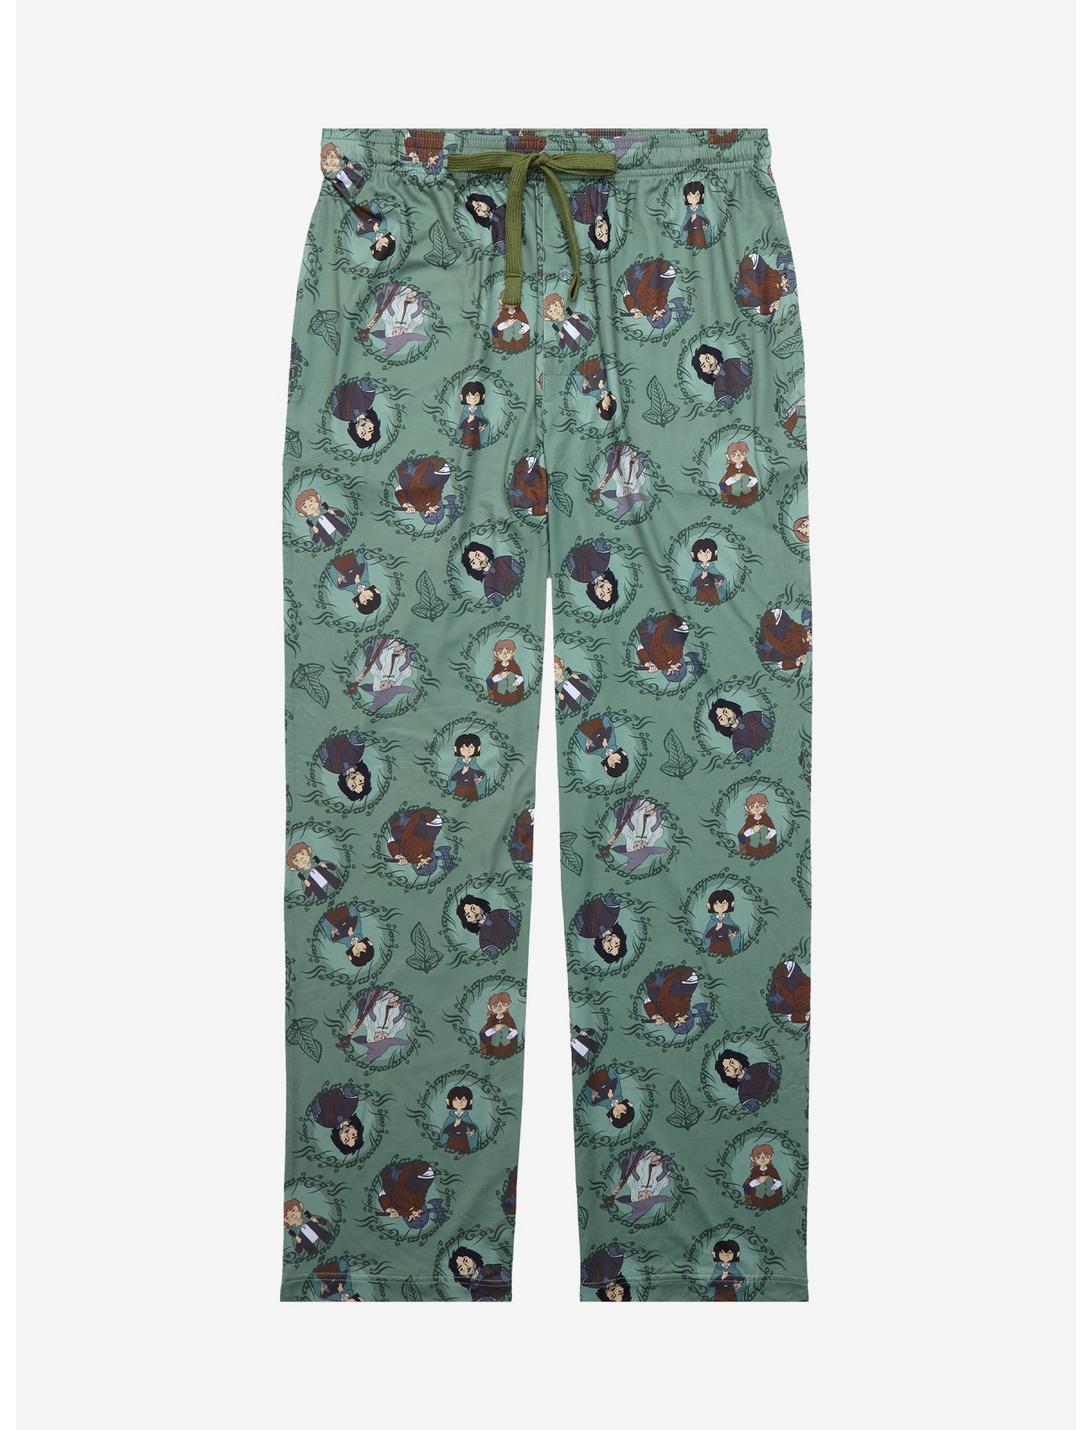 The Lord of the Rings Characters Allover Print Sleep Pants - BoxLunch Exclusive, SAGE, hi-res